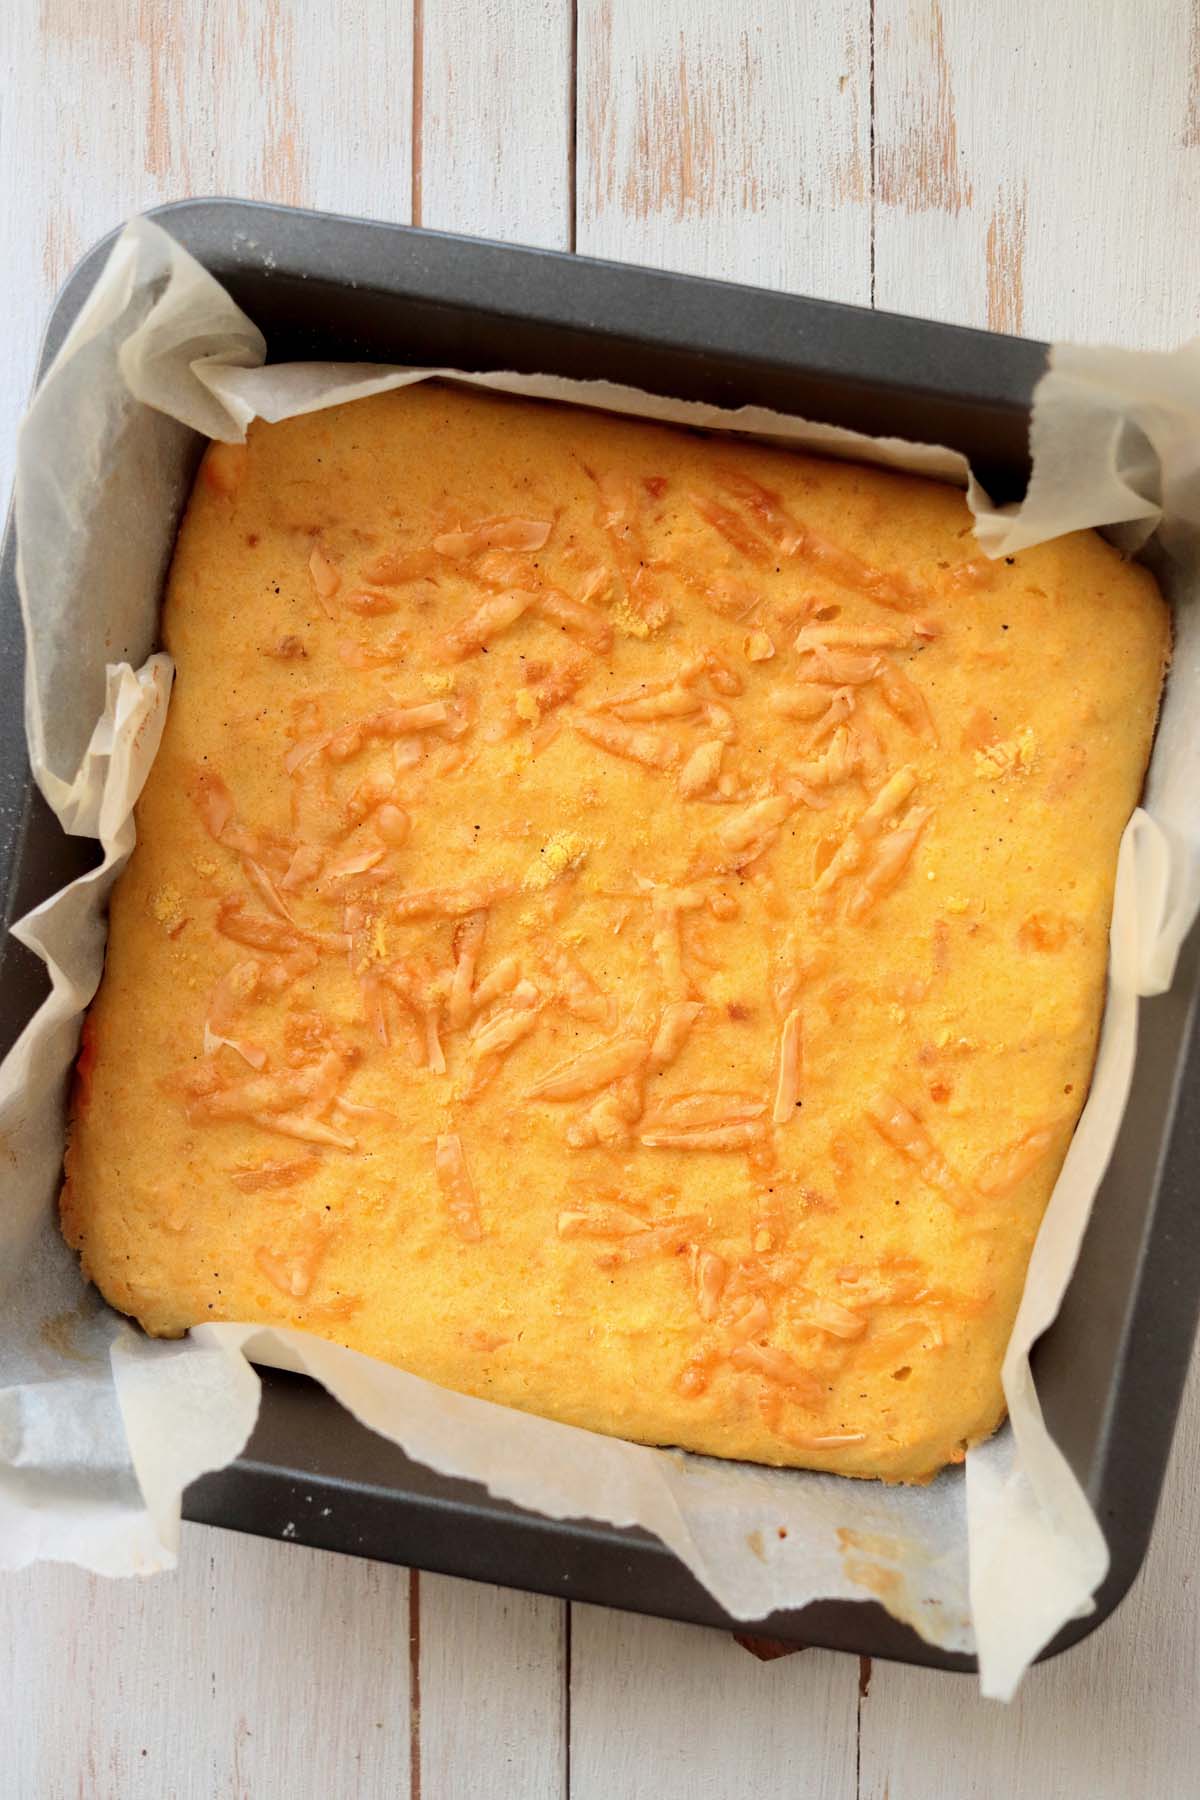 Baked cornbread in a baking pan lined with parchment paper.